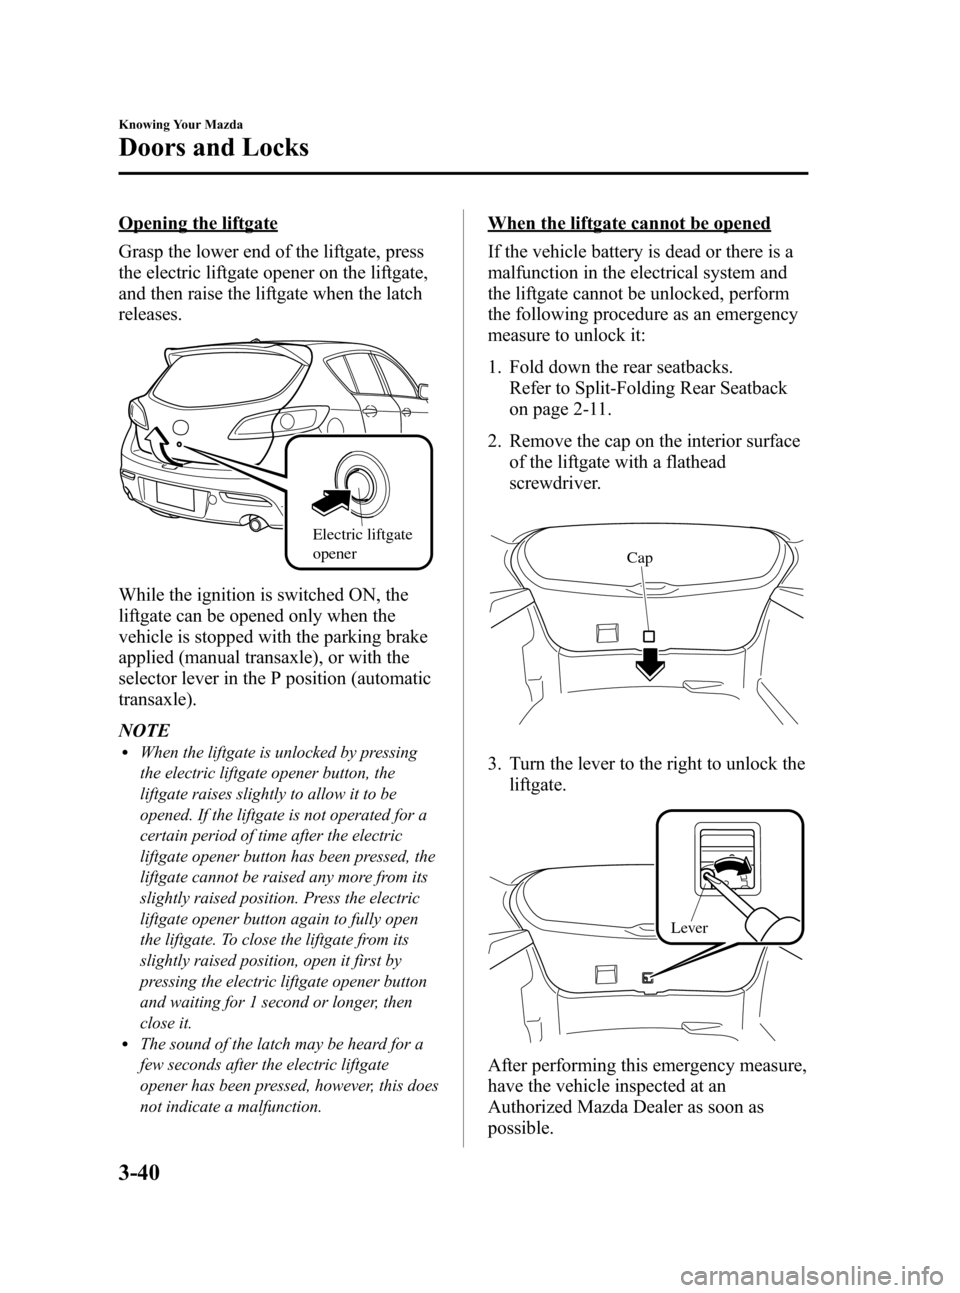 MAZDA MODEL 3 HATCHBACK 2010  Owners Manual (in English) Black plate (116,1)
Opening the liftgate
Grasp the lower end of the liftgate, press
the electric liftgate opener on the liftgate,
and then raise the liftgate when the latch
releases.
Electric liftgate